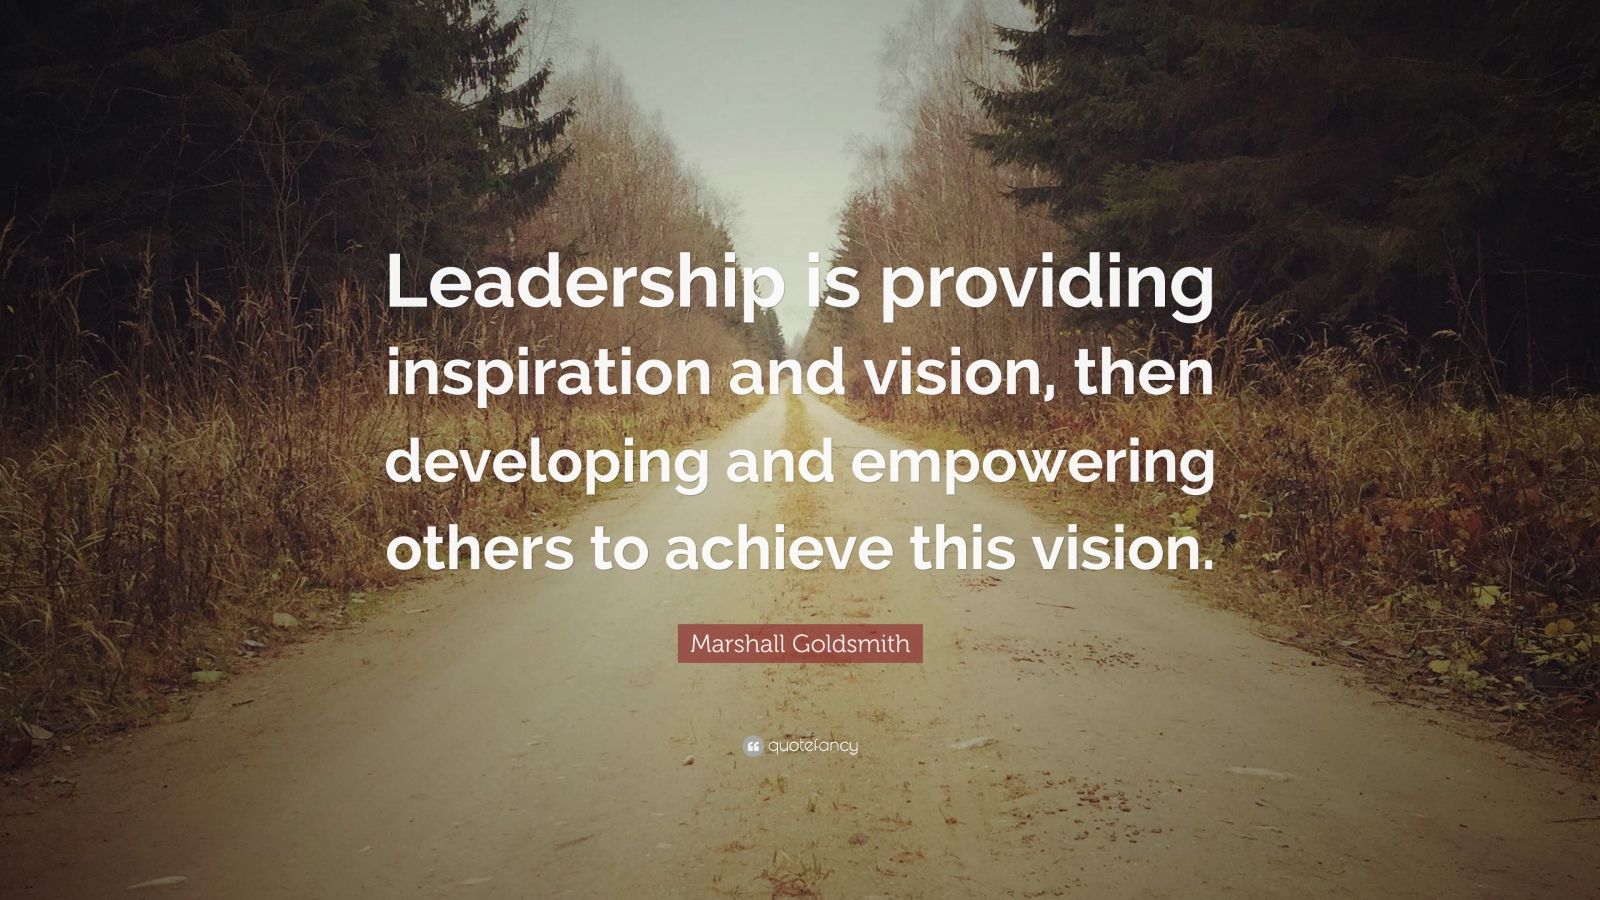 Marshall Goldsmith Quote: “Leadership is providing inspiration and